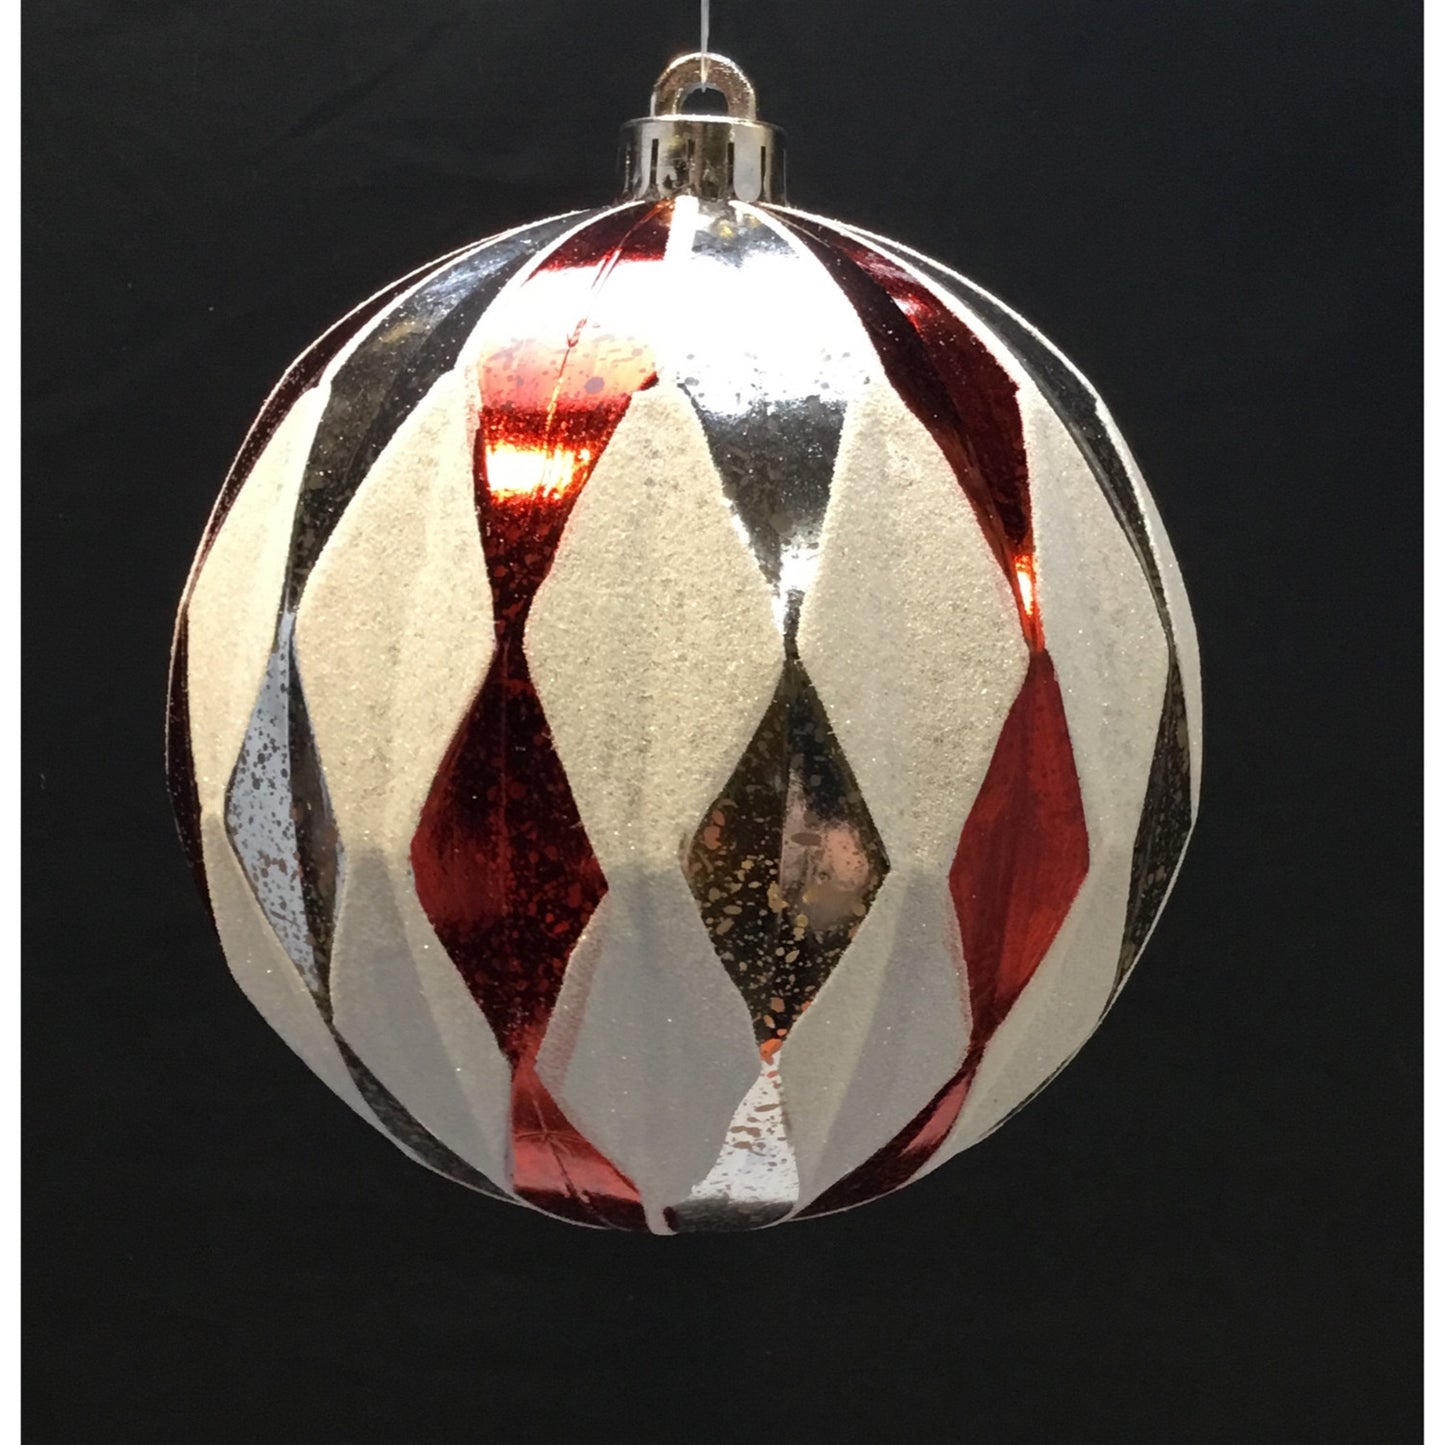 6" Harlequin Mercury Ball Ornament in Red/Silver/White | XJB